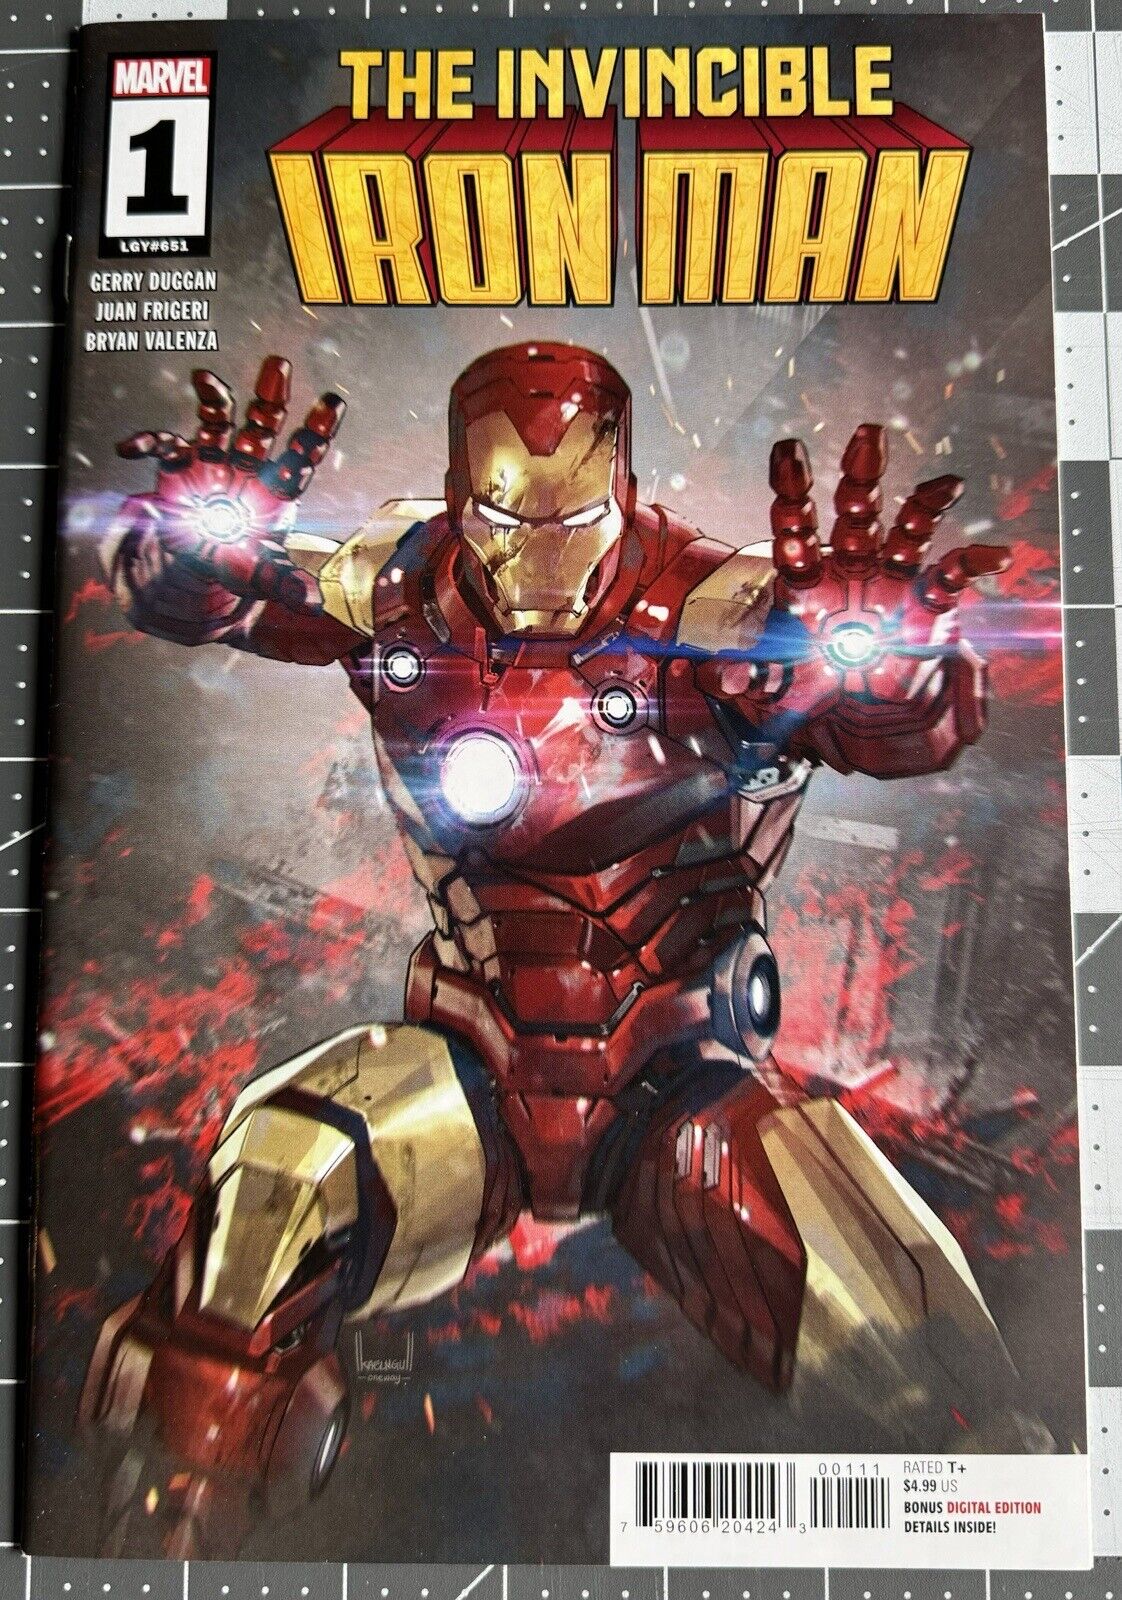 The Invincible Iron Man #1 Marvel Comics 2023 First Printing Cover A Variant